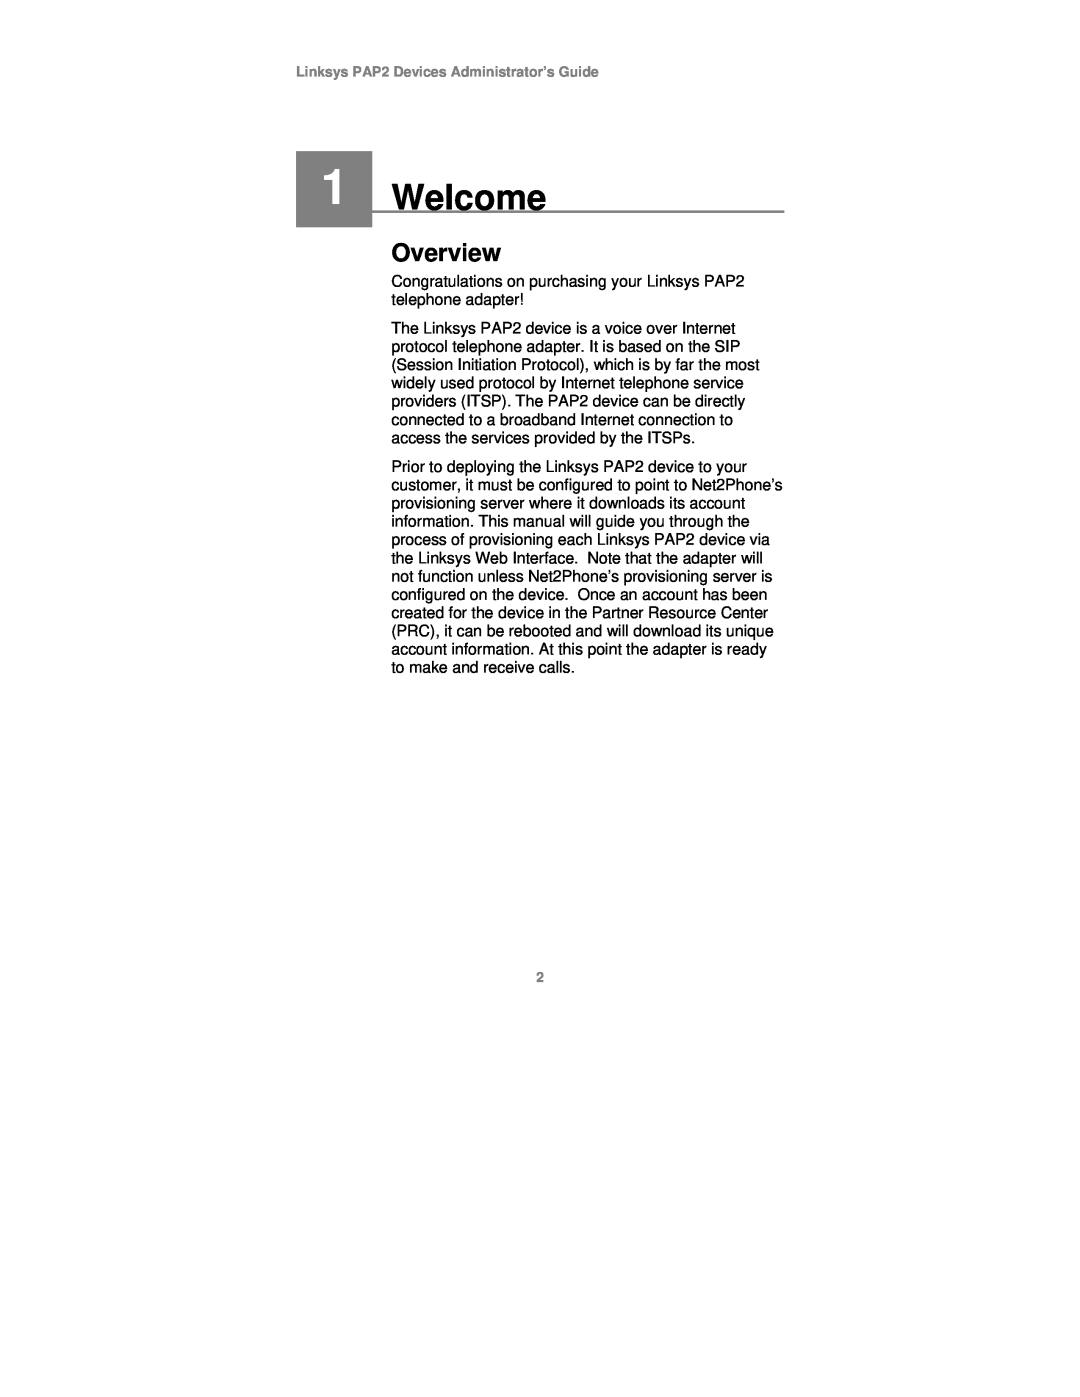 Linksys PAP2T-NA manual 1 1 Welcome, Overview, Linksys PAP2 Devices Administrator’s Guide 